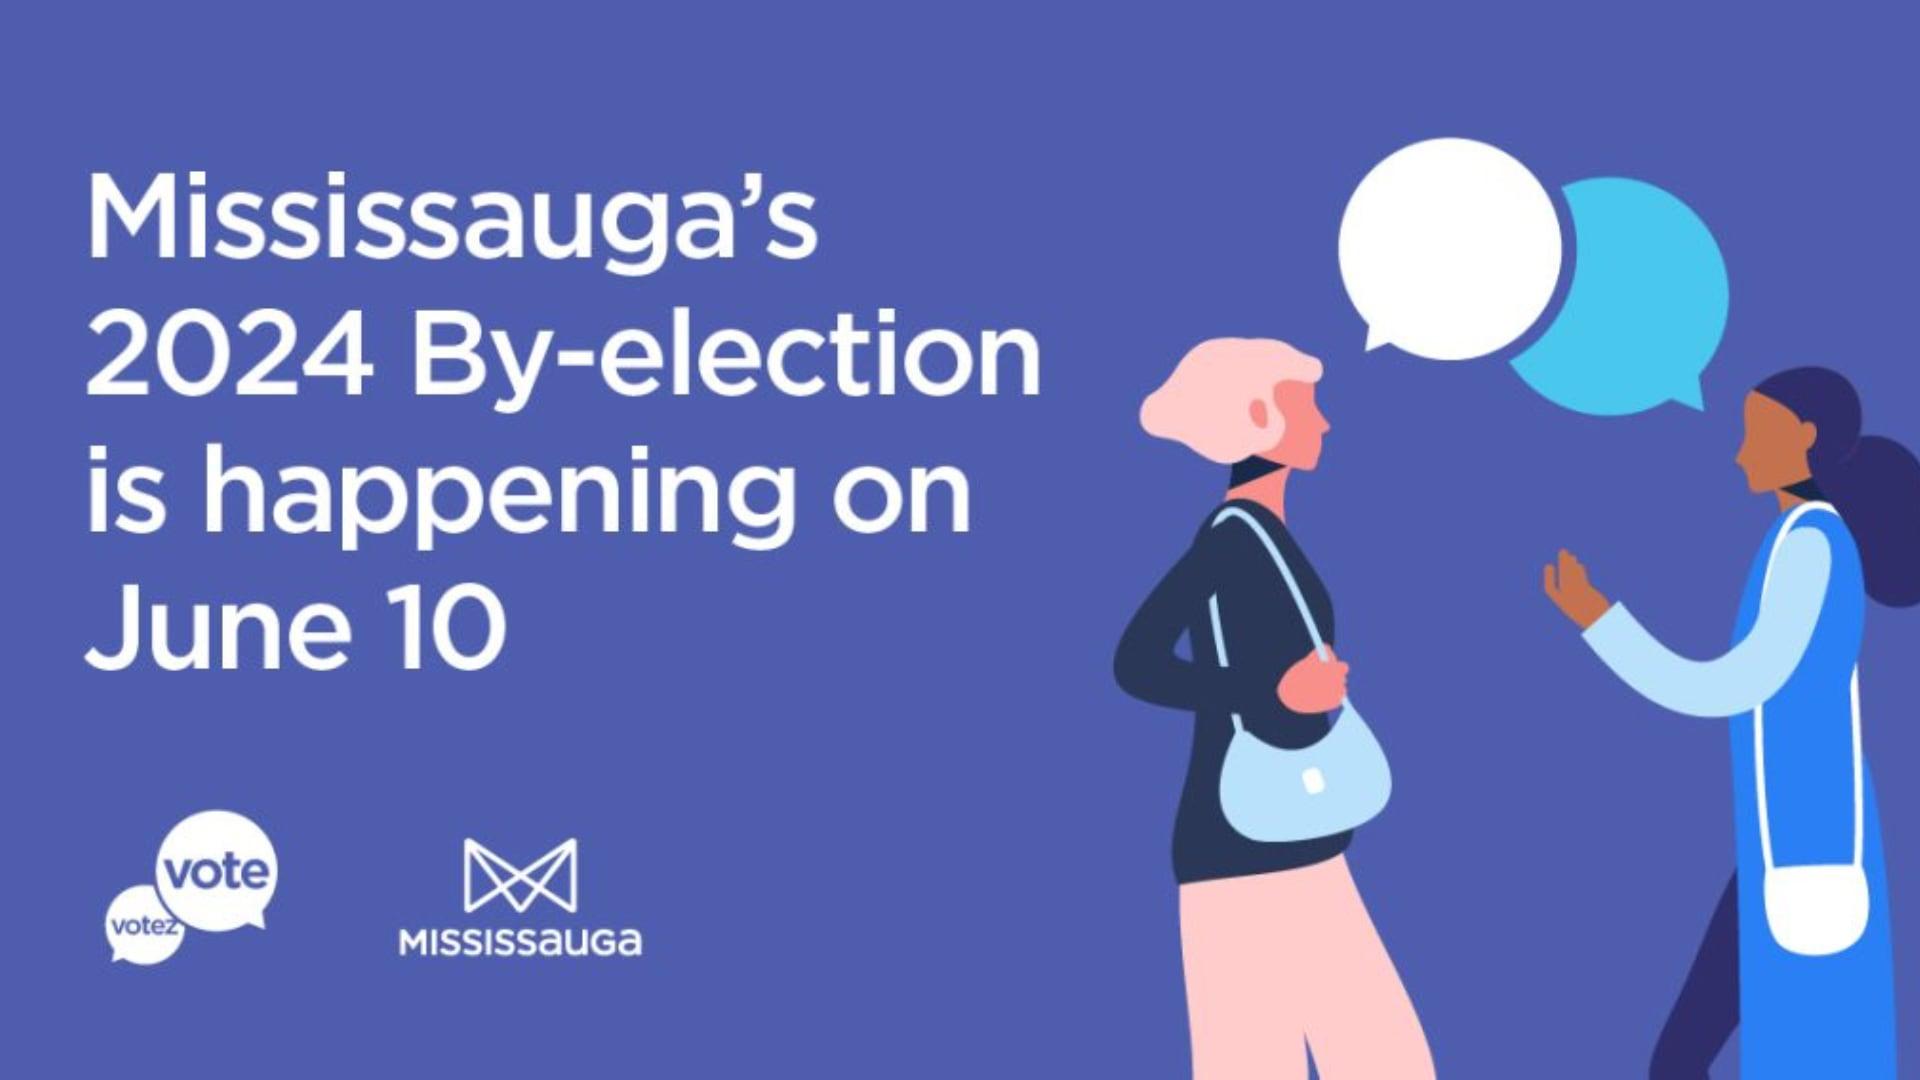 By-election for Mississauga Mayor to take place June 10, 2024